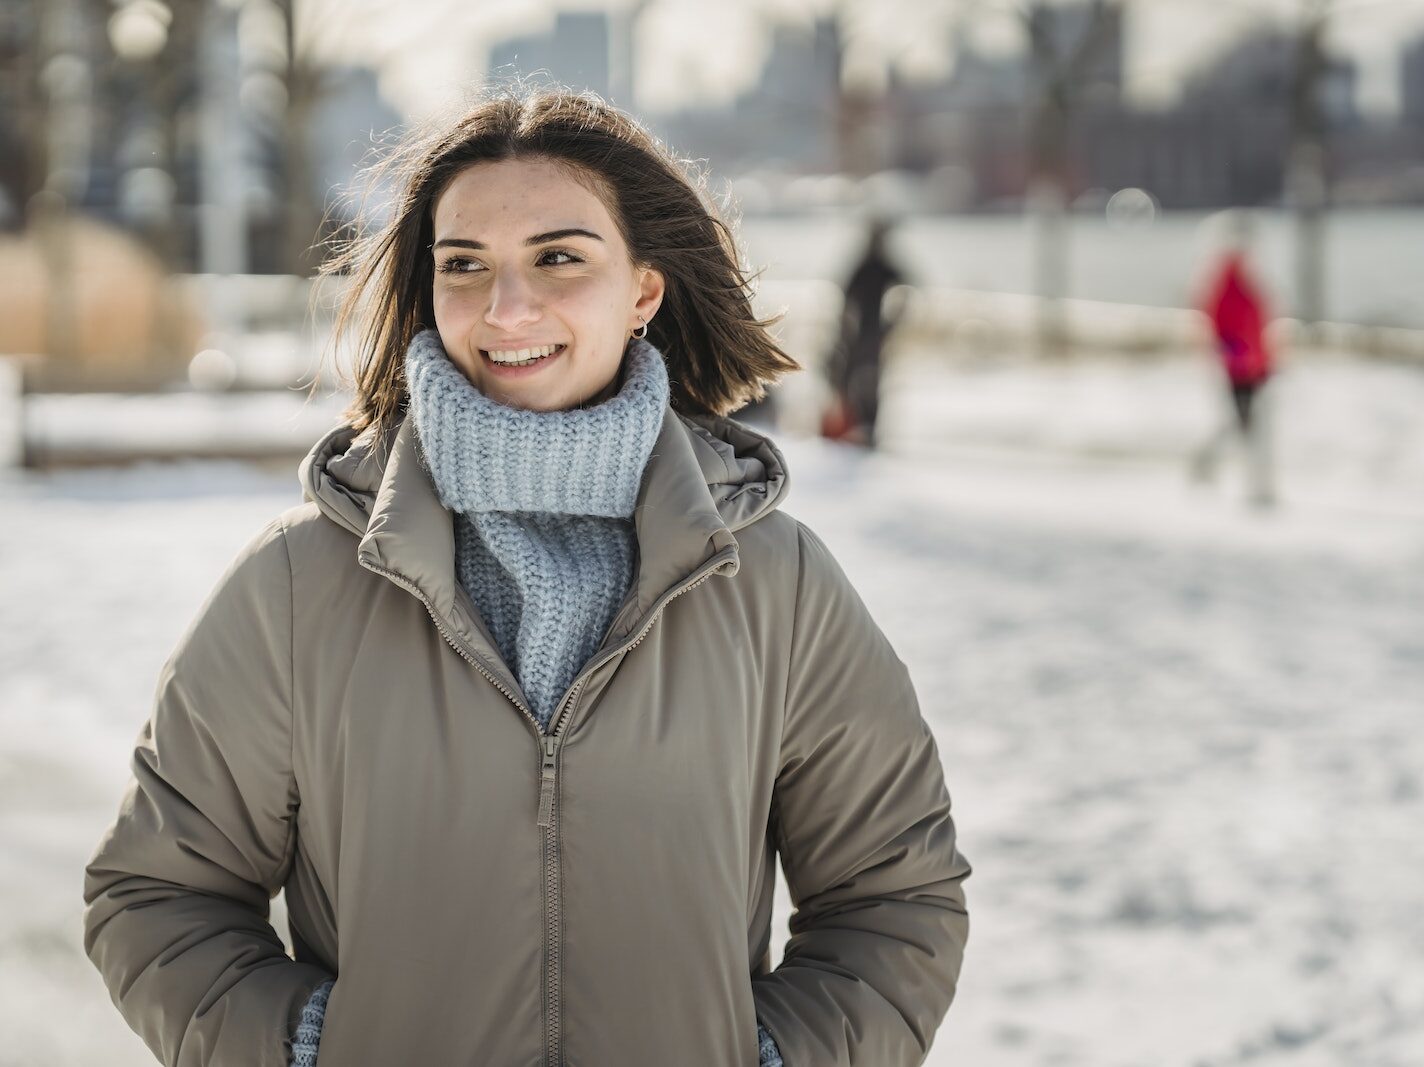 Content young brunette in blue knitted sweater and warm jacket standing with hands in pockets in snowy city park on cold winter day